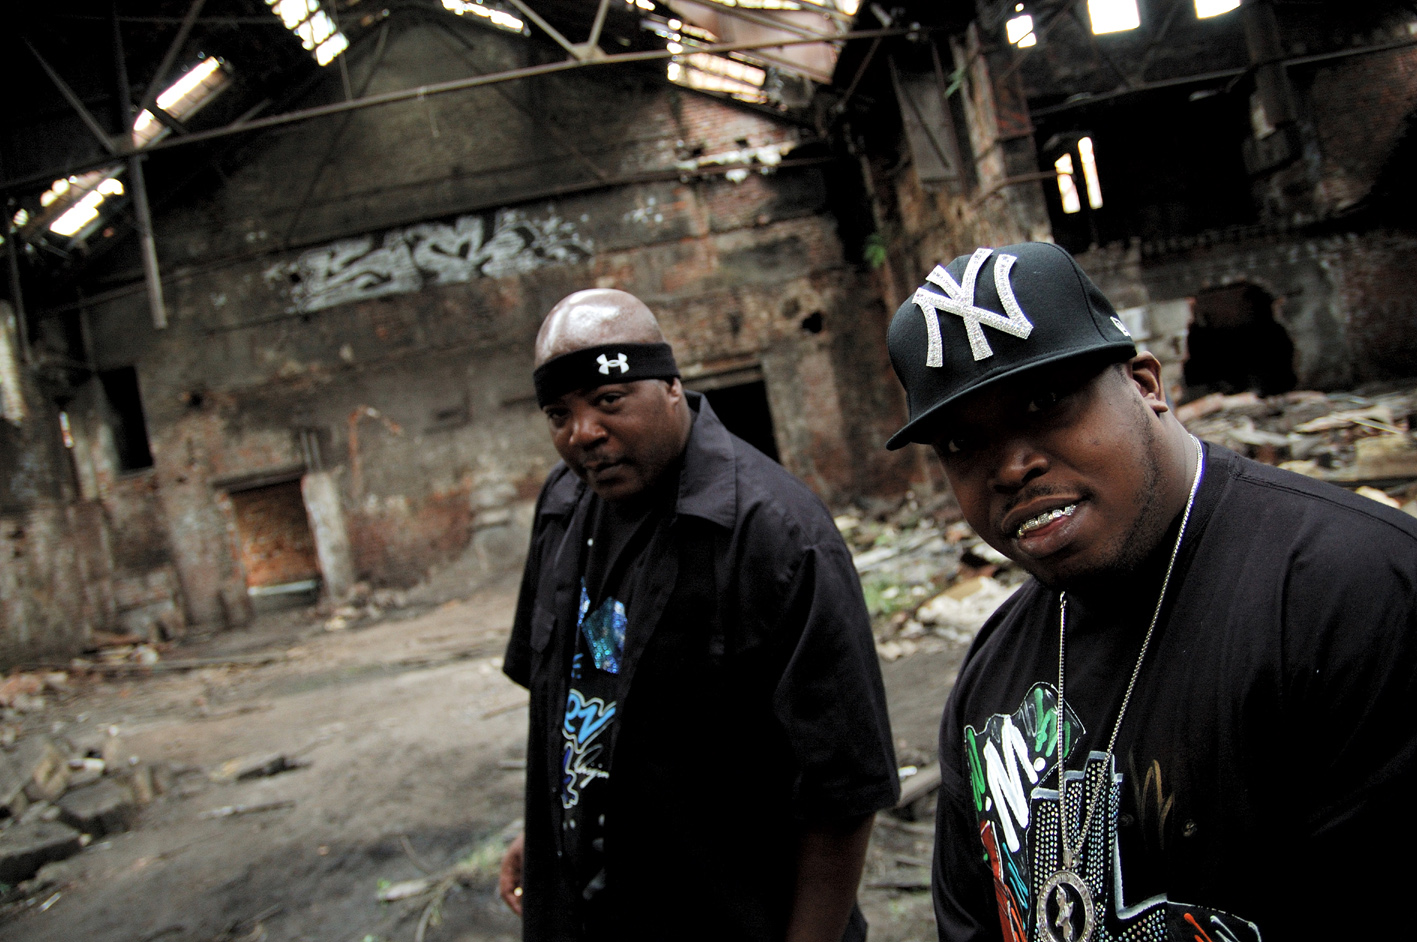 M.O.P. - "Broad Daylight" ft. Busta Rhymes